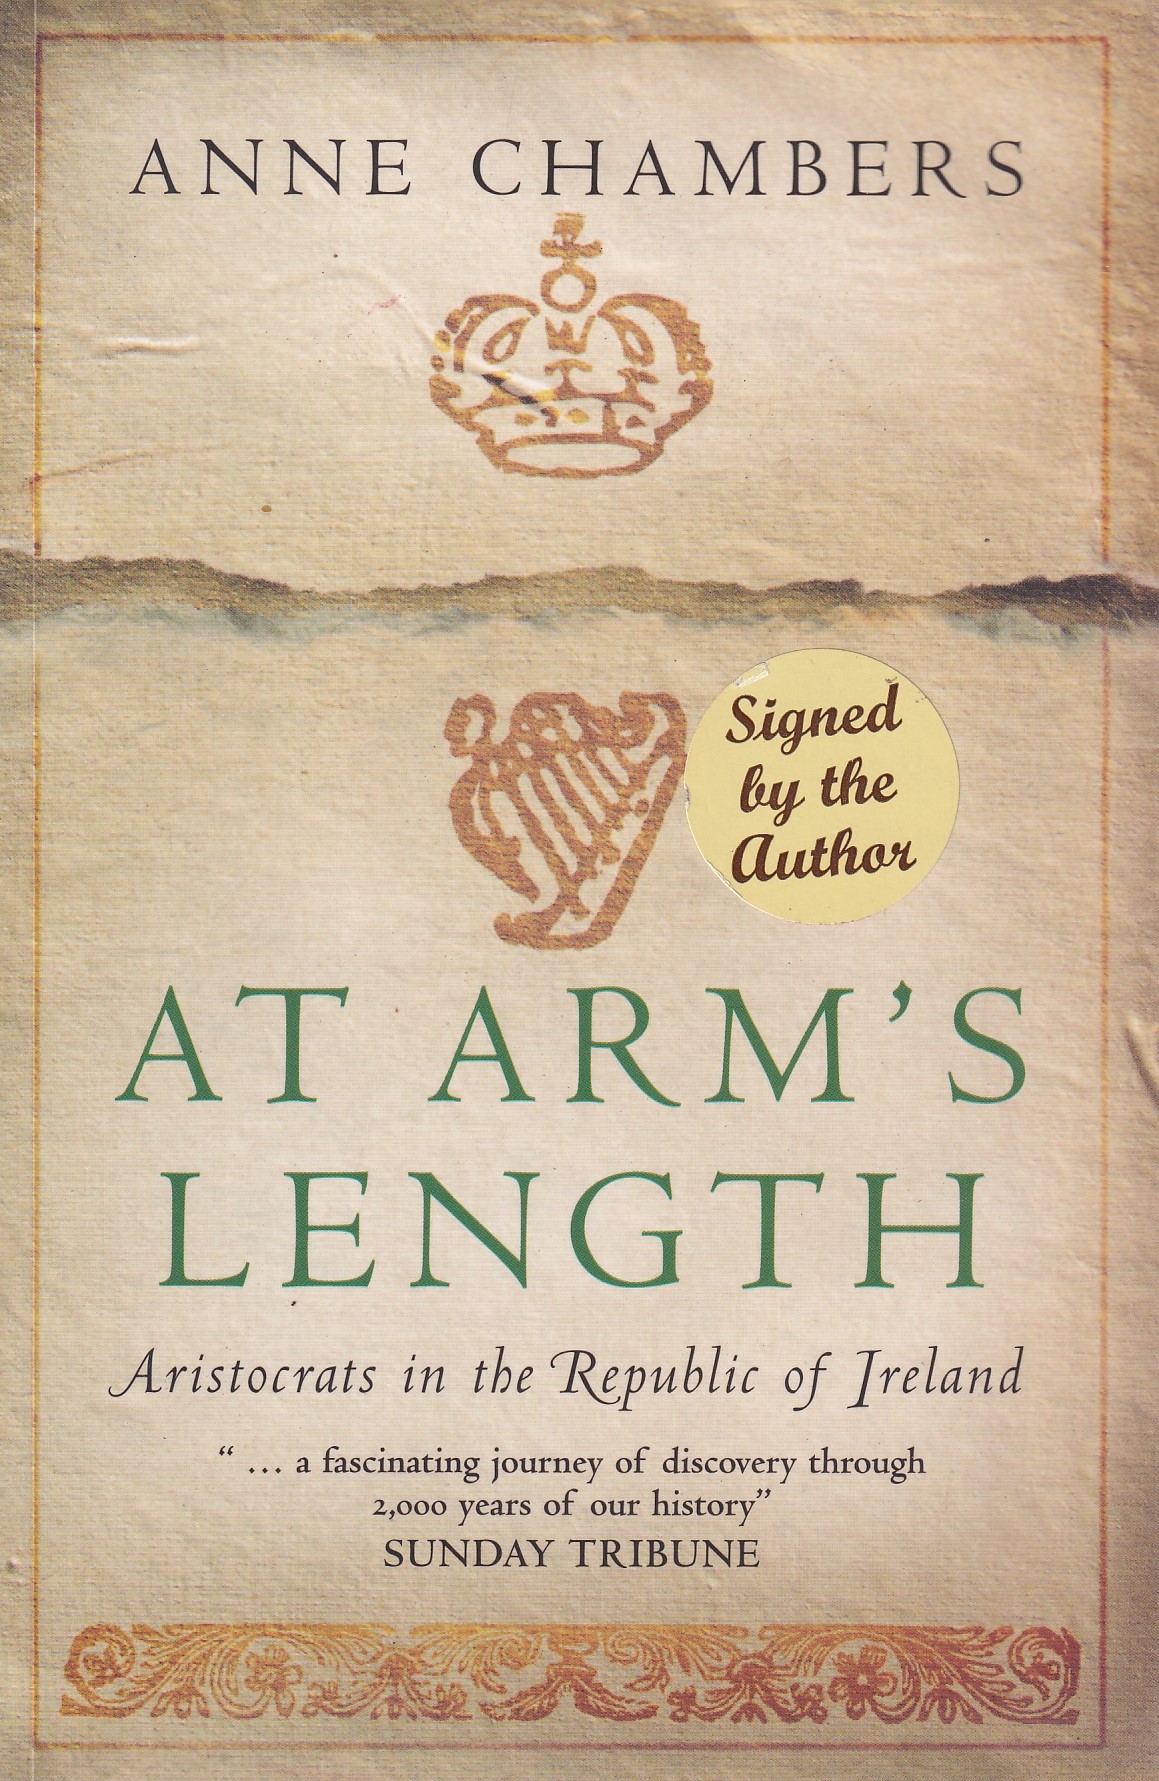 At arm’s length : aristocrats in the Republic of Ireland (Signed) by Chambers, Anne